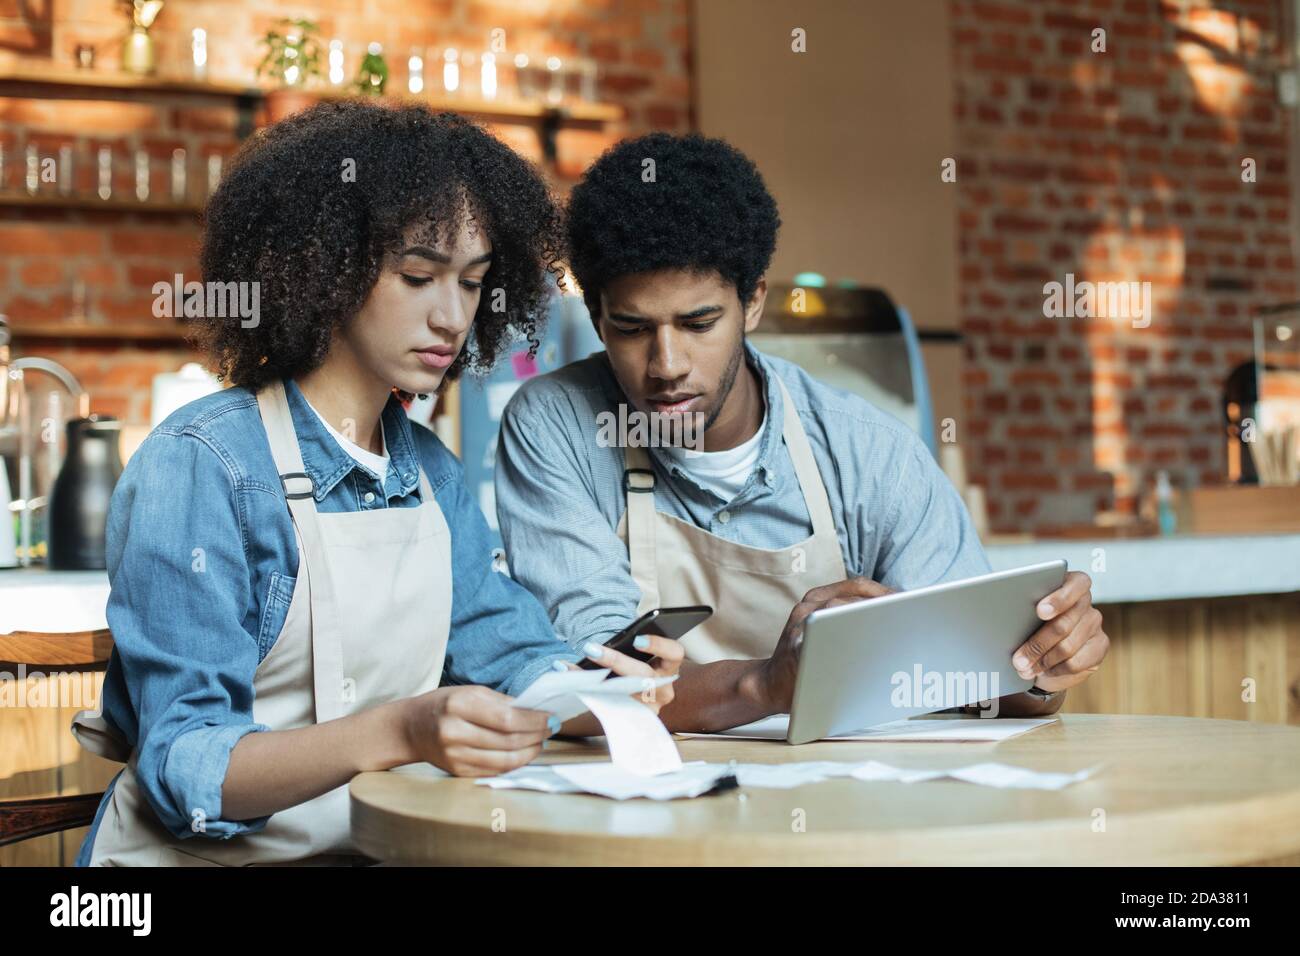 Financial problems in city cafe during lockdown Stock Photo